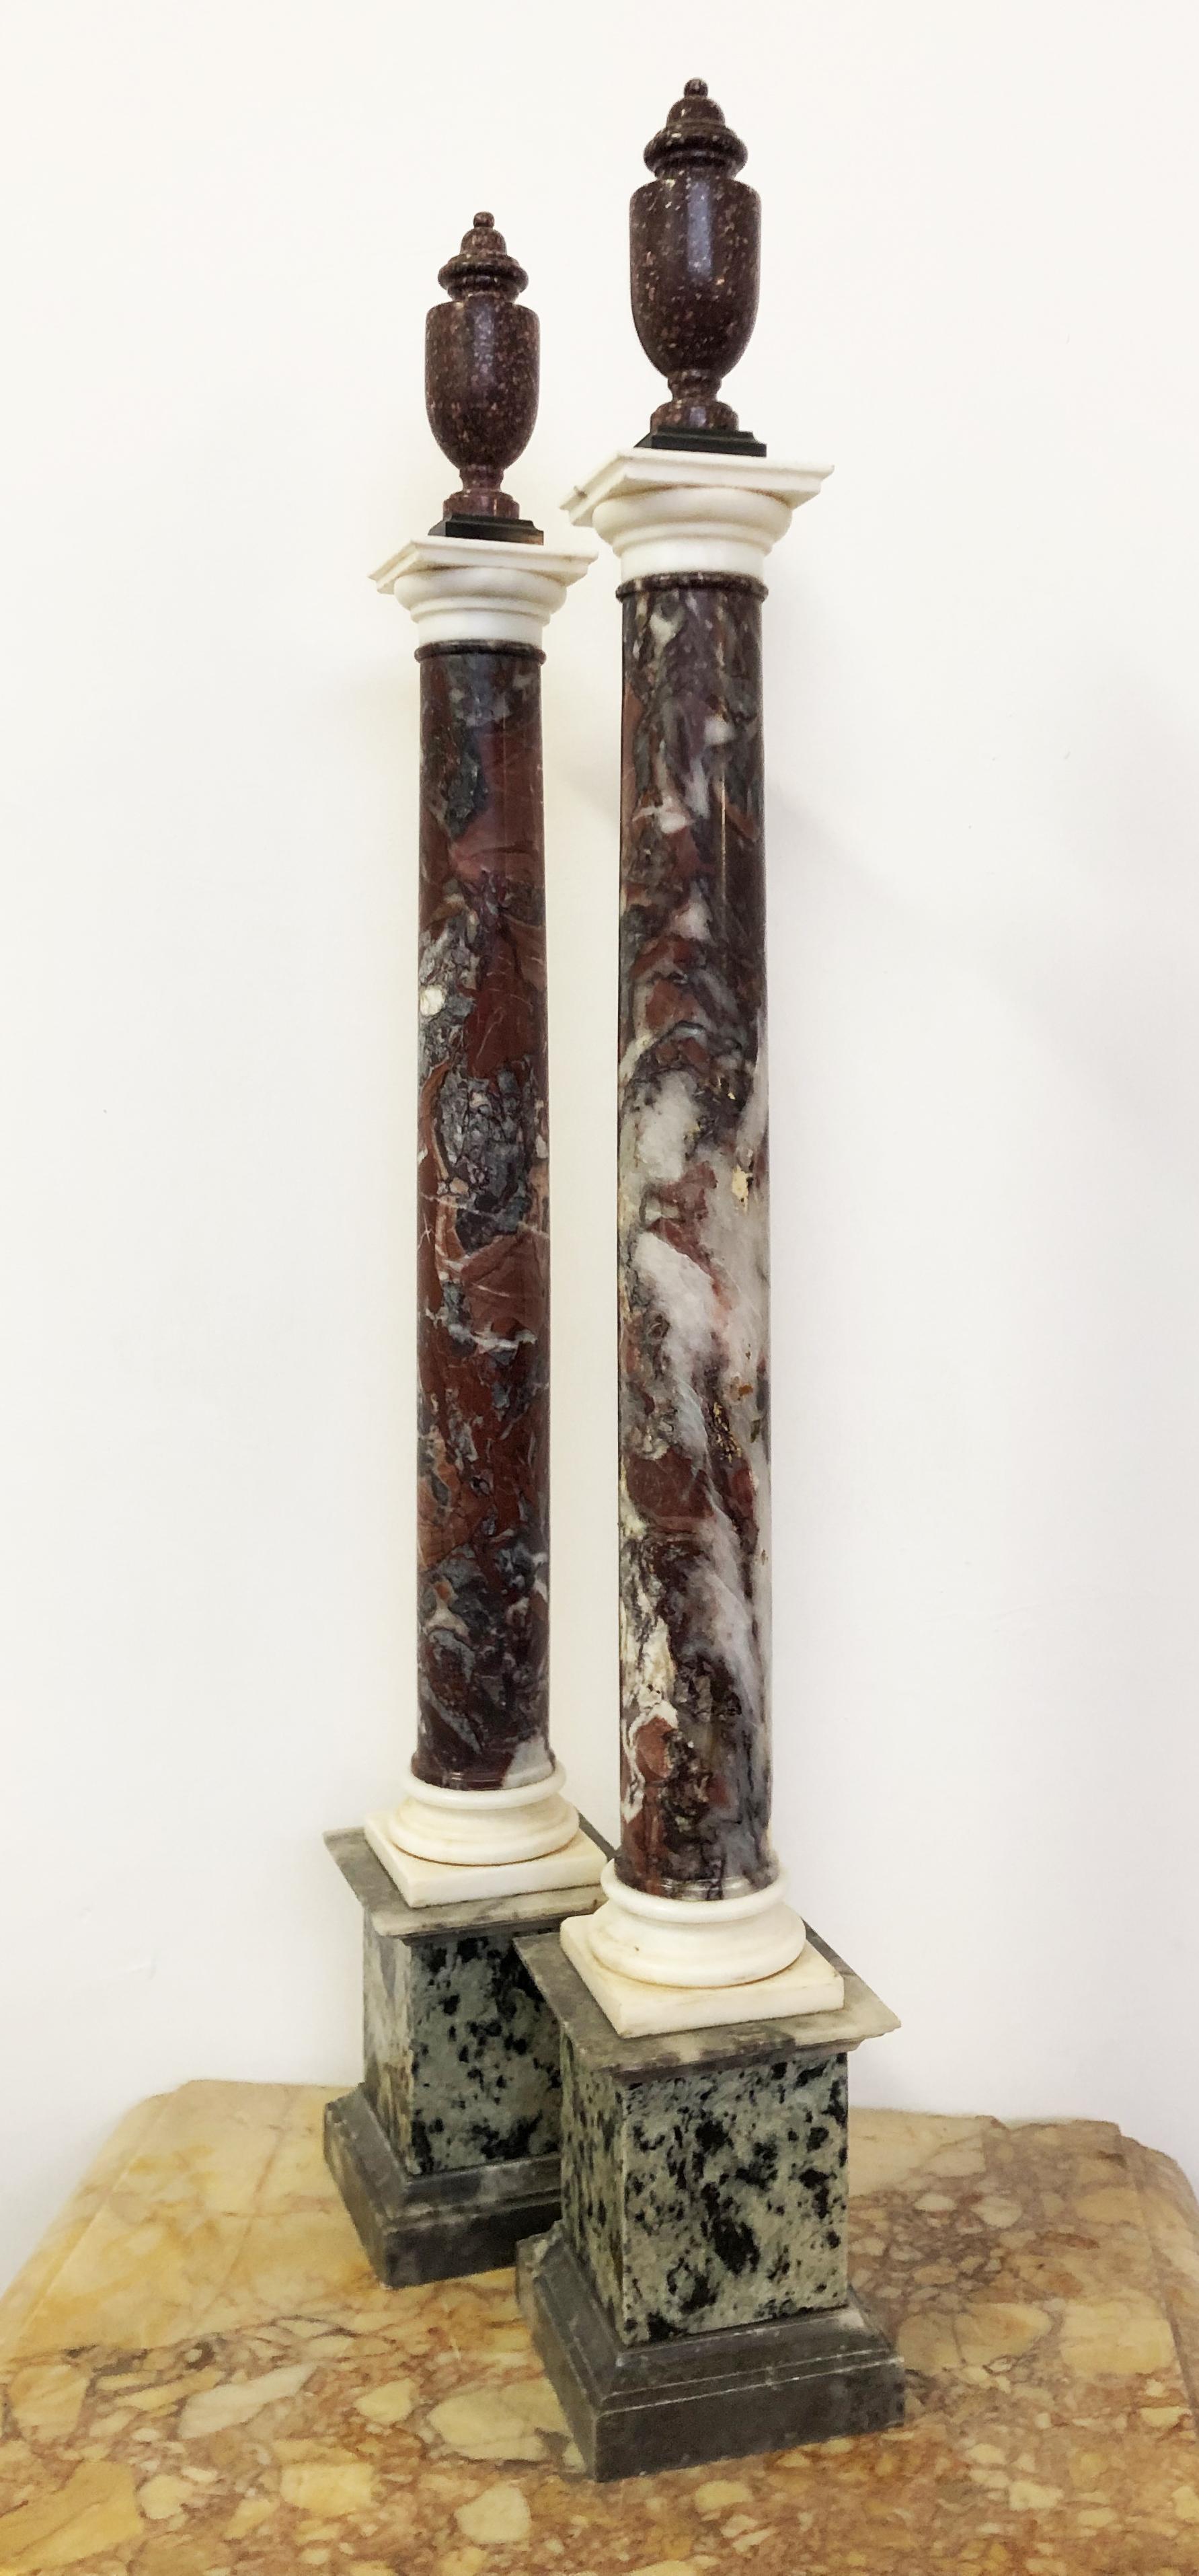 A very beautiful and impressive pair of grand tour column with a pair of neoclassical porphyry vase on the Tuscany style capital. The opera, is a collection of specimen ancient marble and a very impressive exercise of style. The selection of very